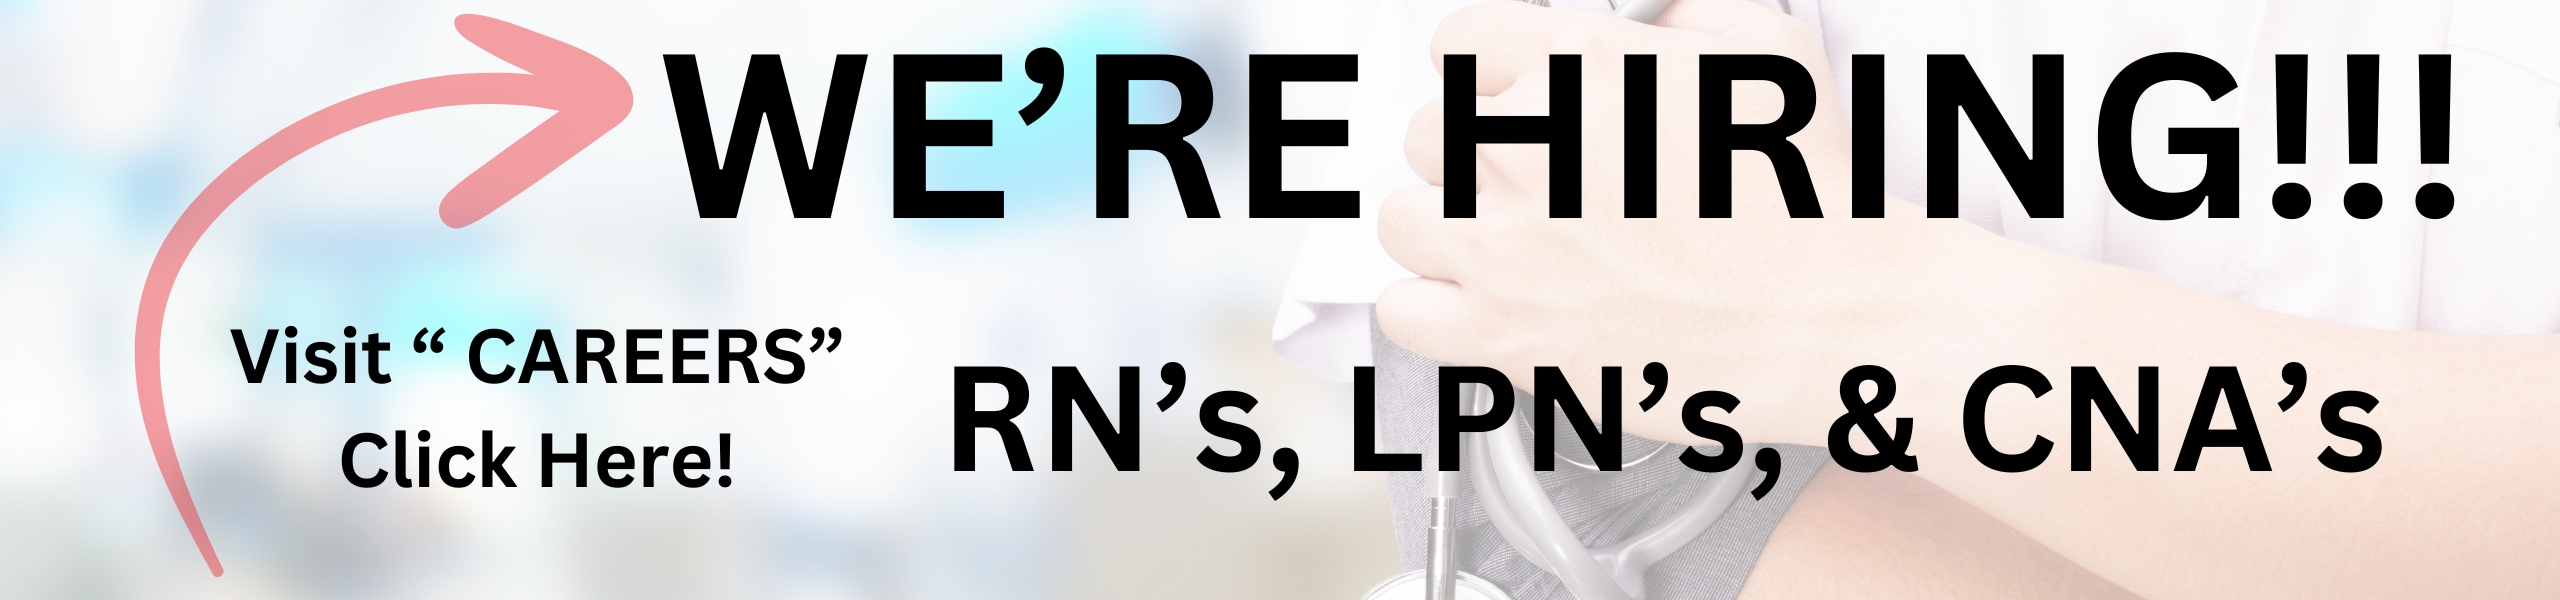 WE ARE HIRING RN'S LPN'S AND CNA'S